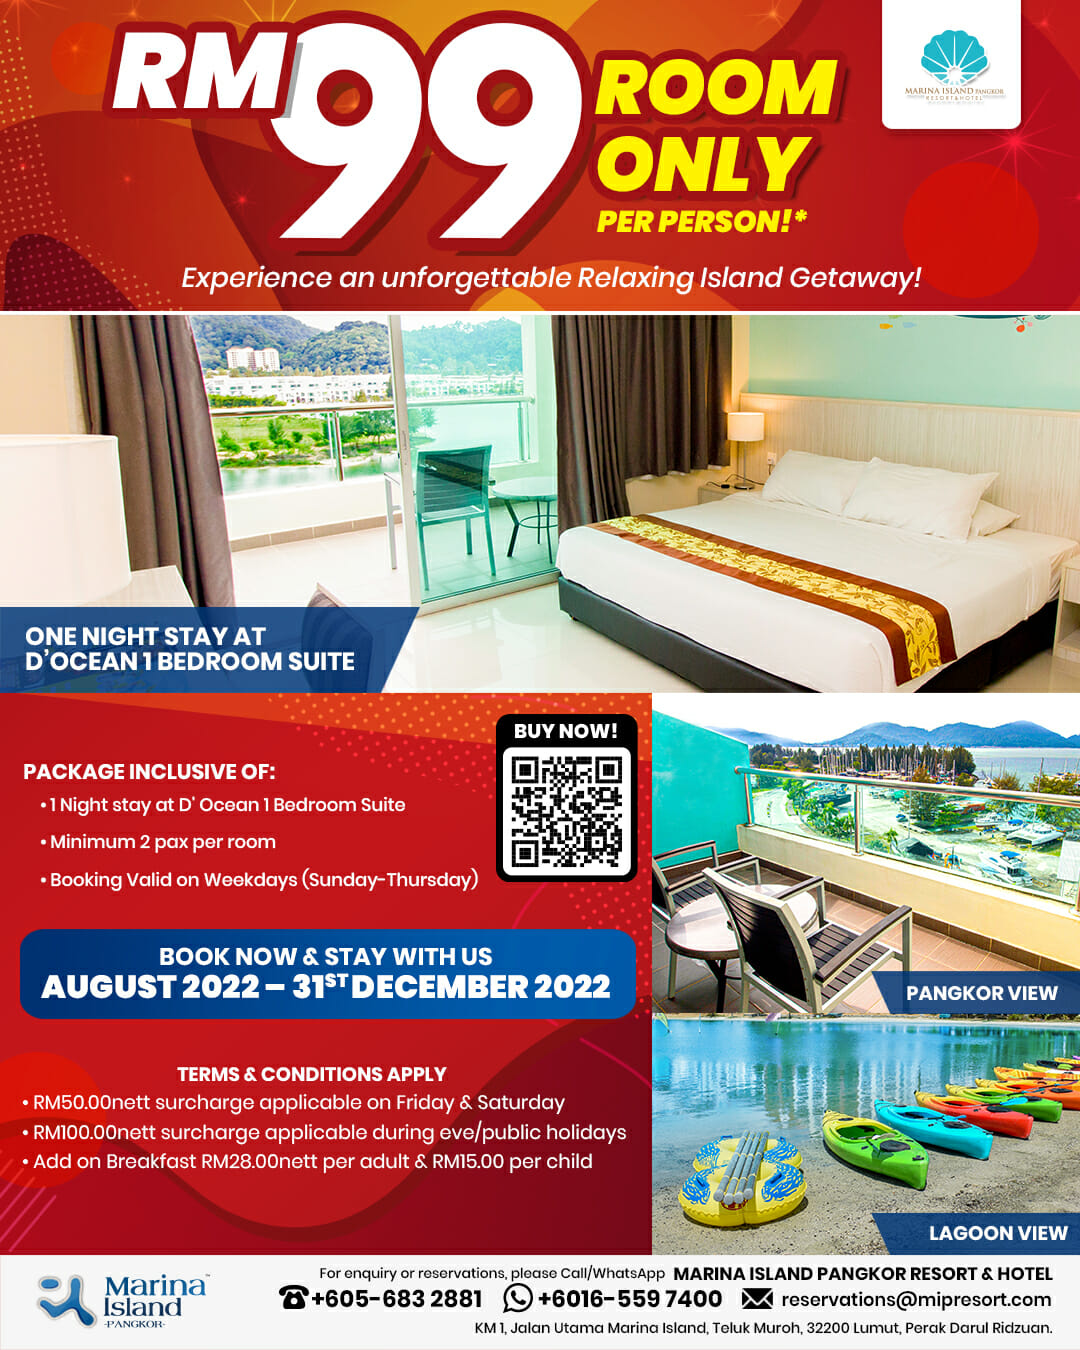 One Night Stay RM99 Room Only